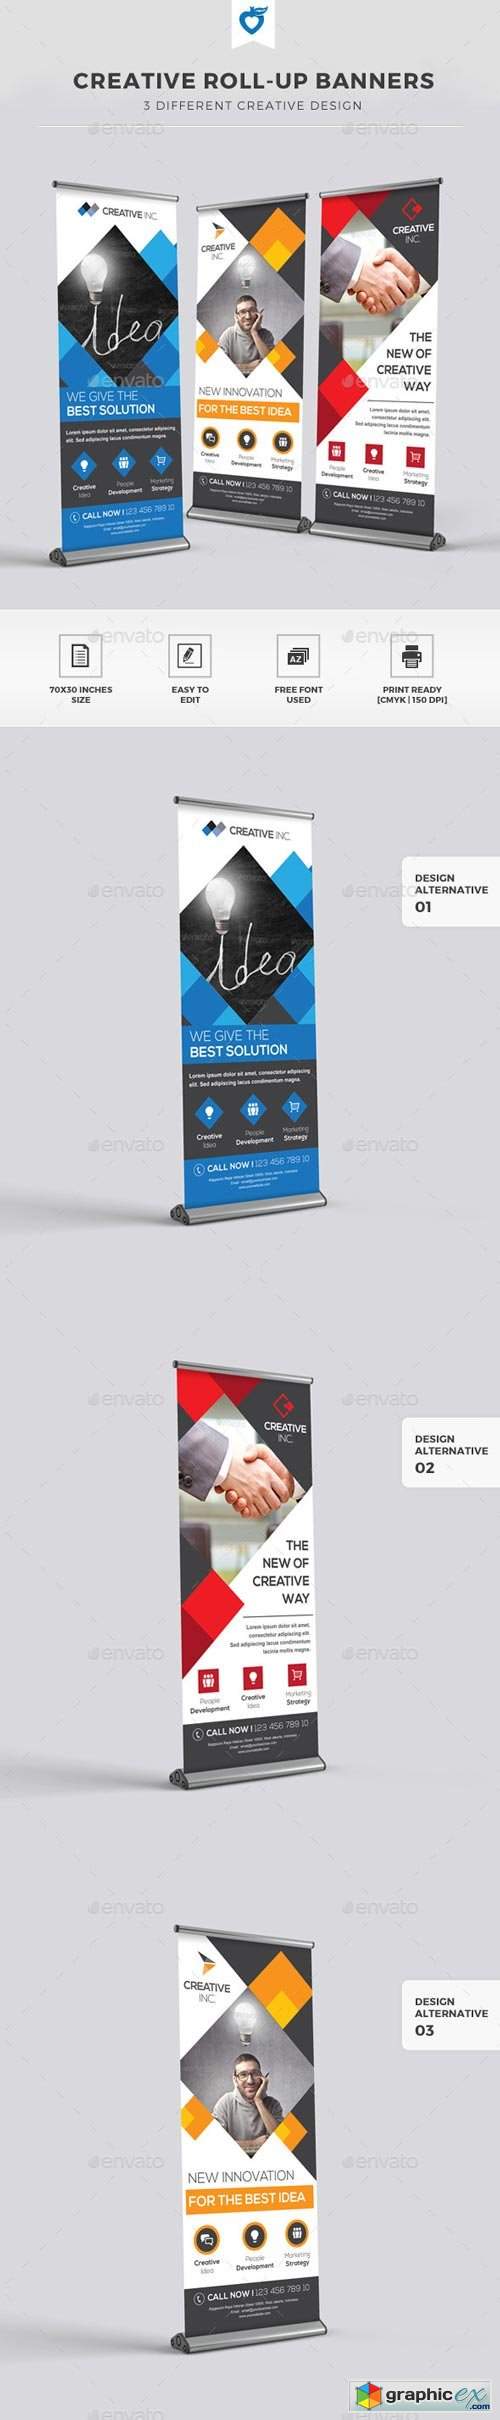 Creative Roll-up Banners